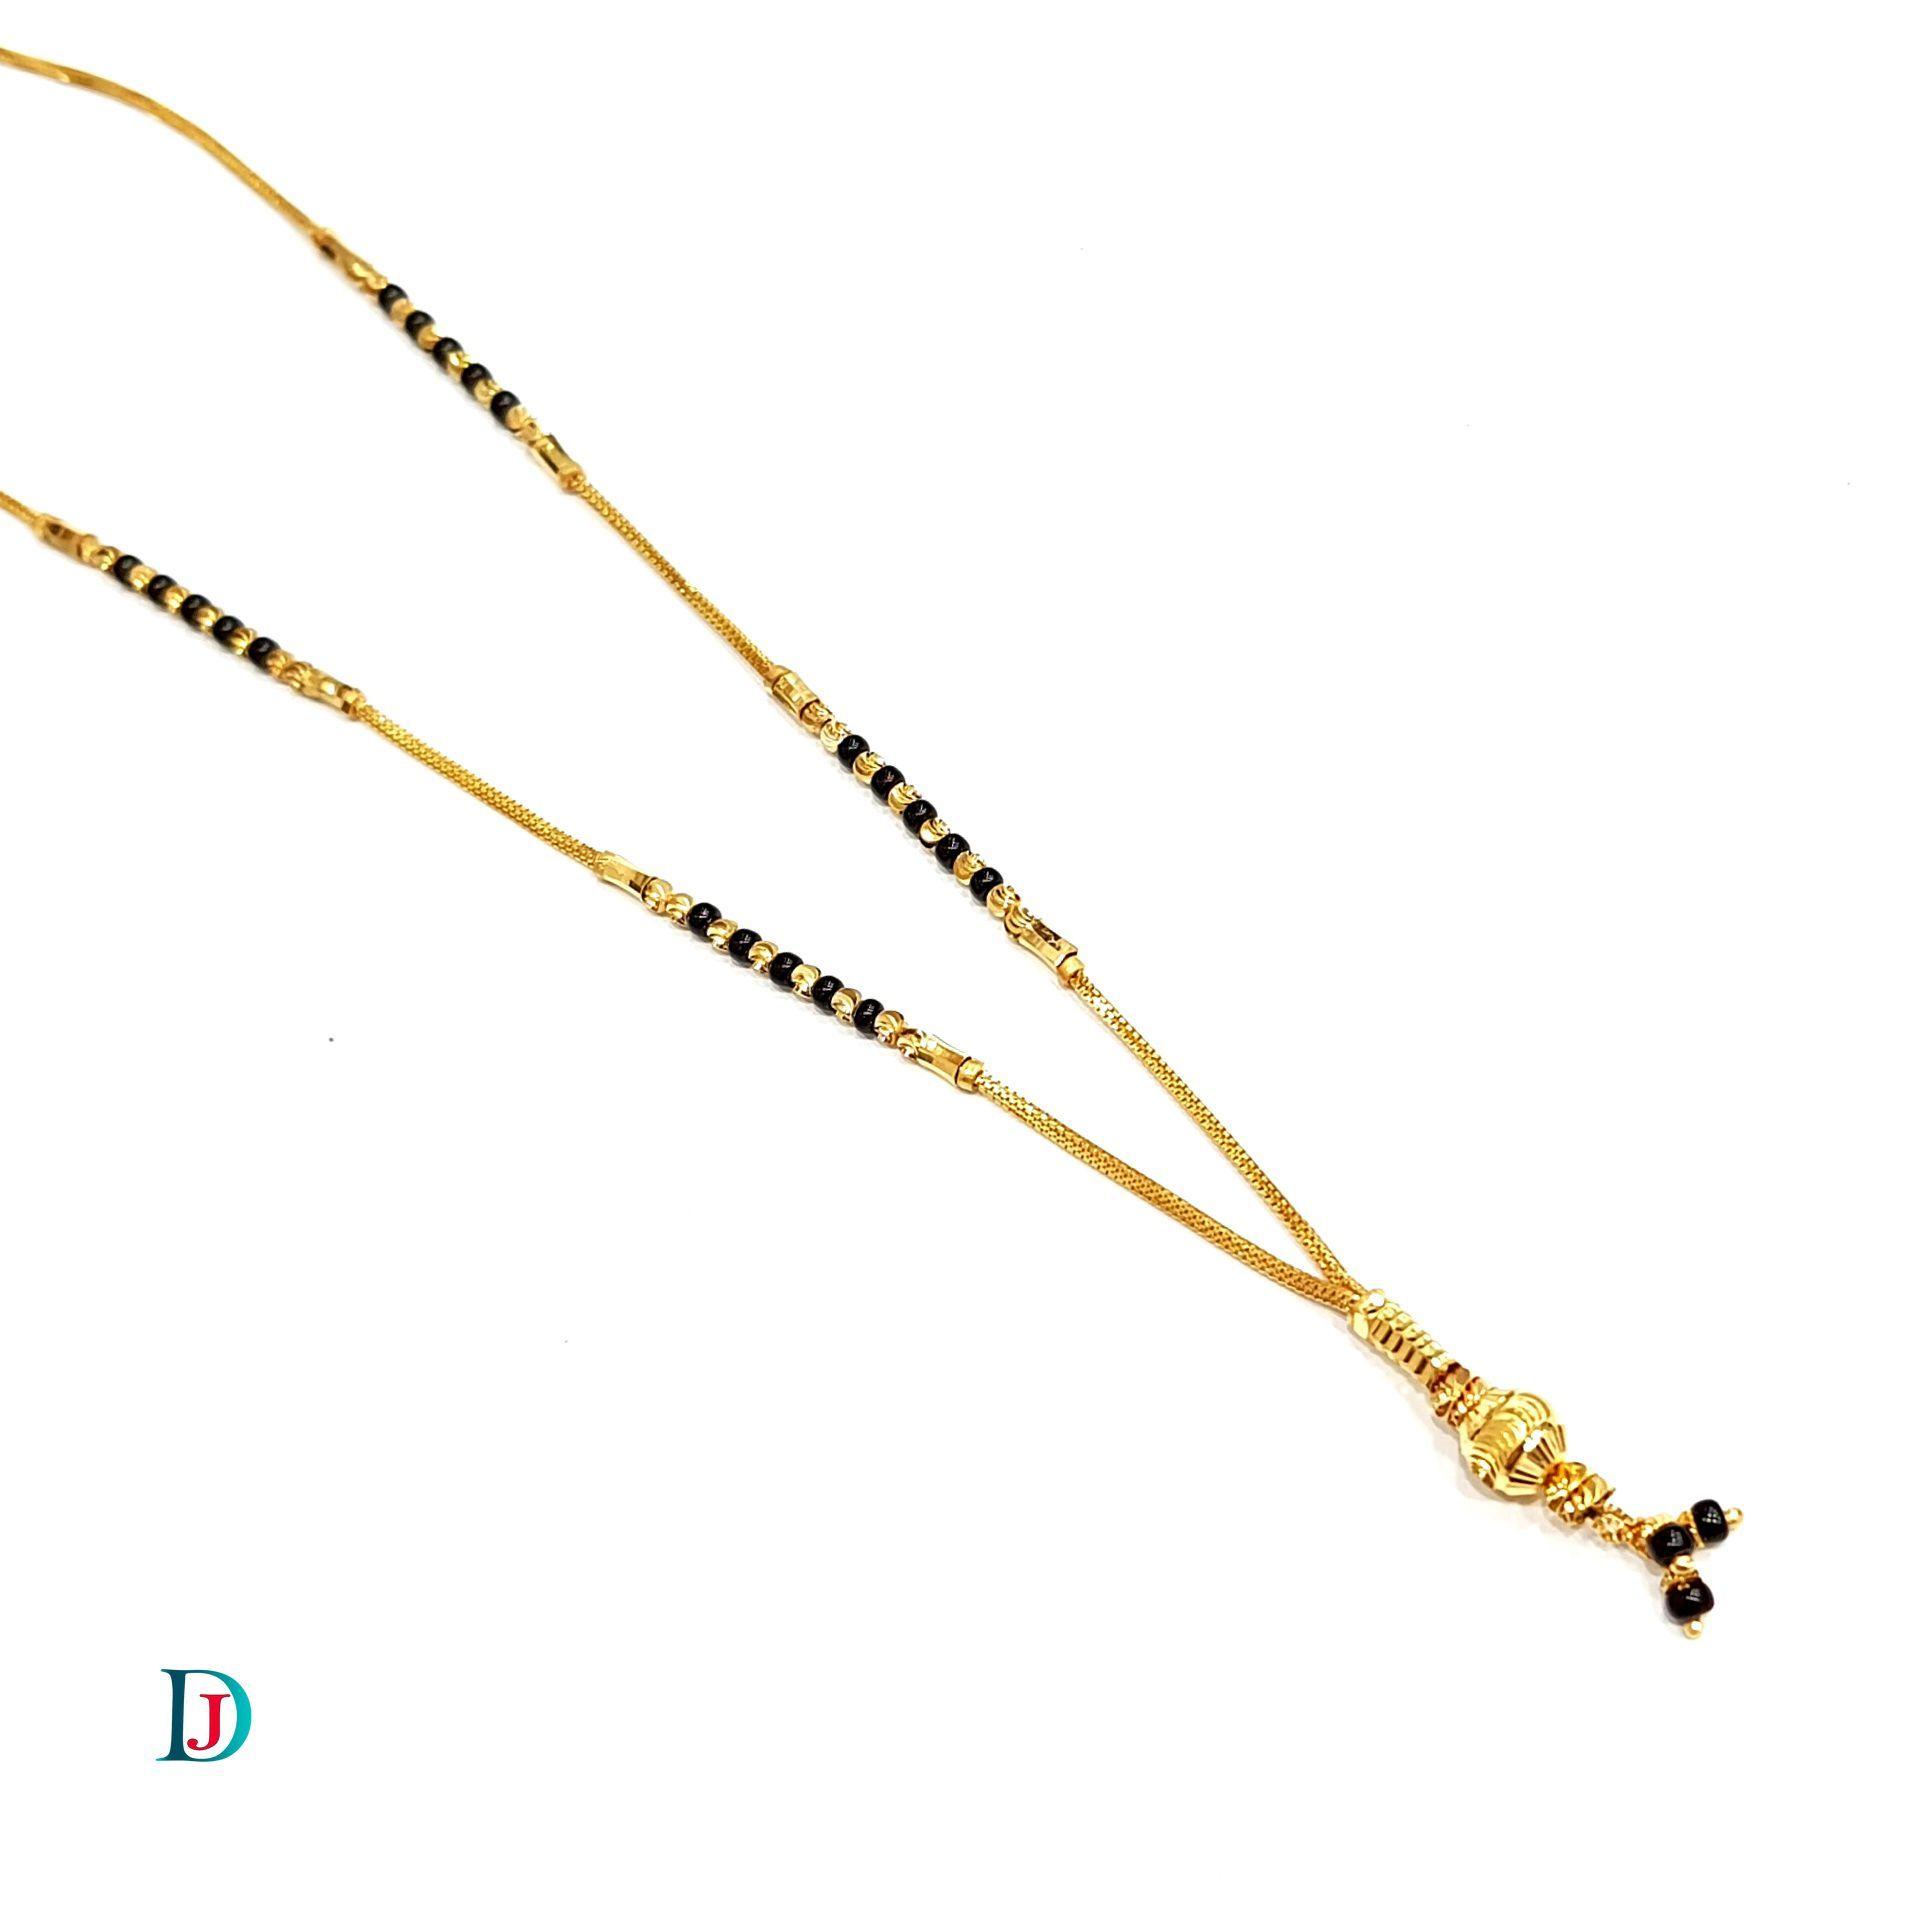 New and Latest Design of Desi Indian Rajasthani Gold Chain 